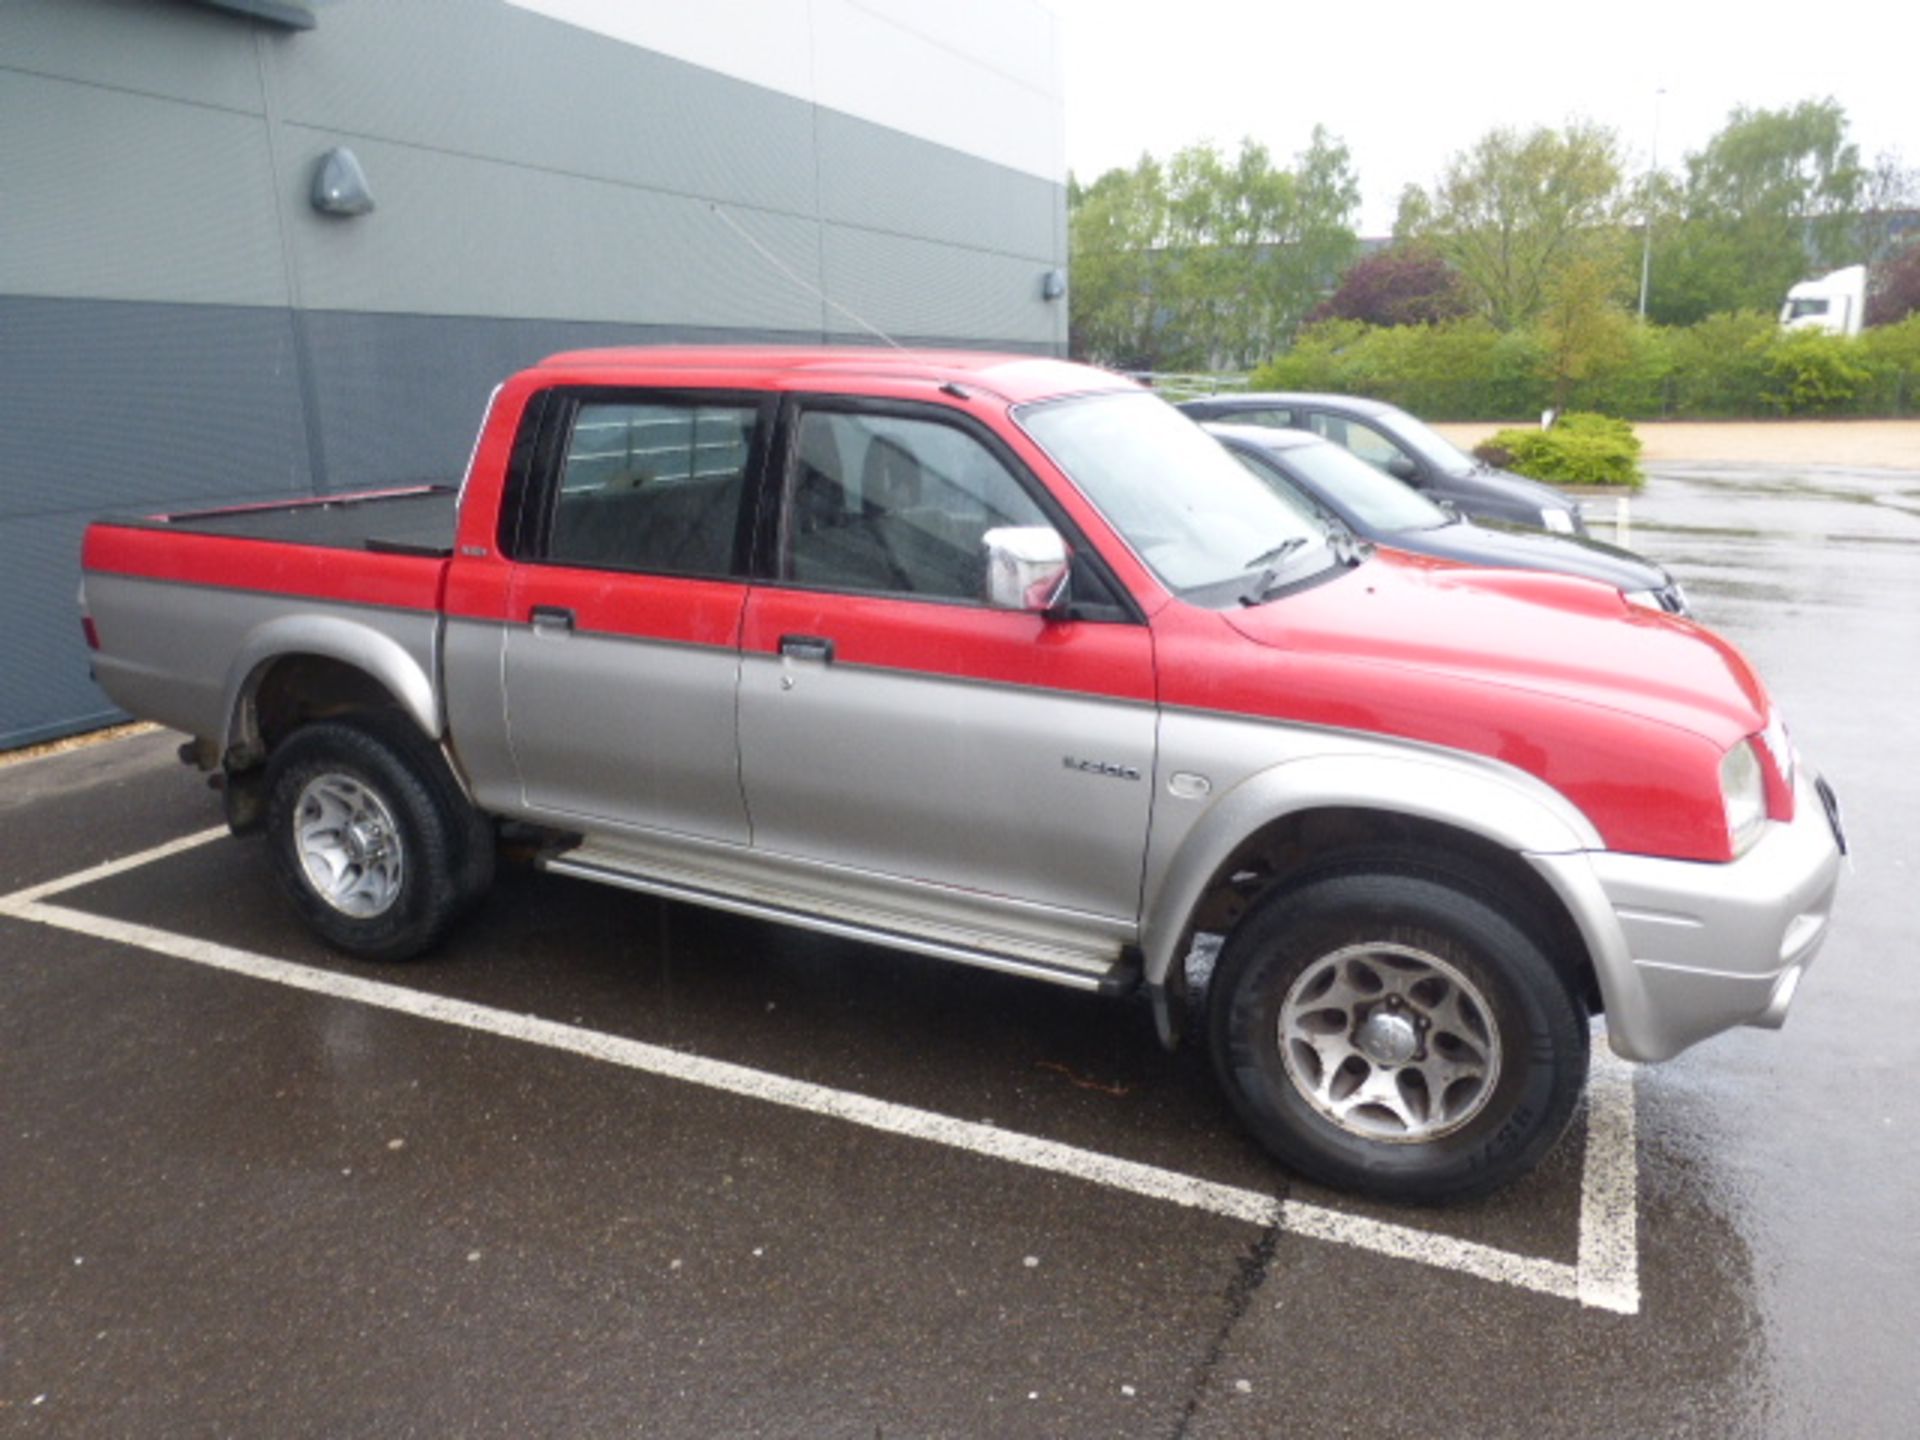 YB54 WNL (2005) Mitsubishi L200 2.5td 4-Life 4WD, 2477cc diesel in red/silver MOT: 14/5/21 - Image 2 of 8